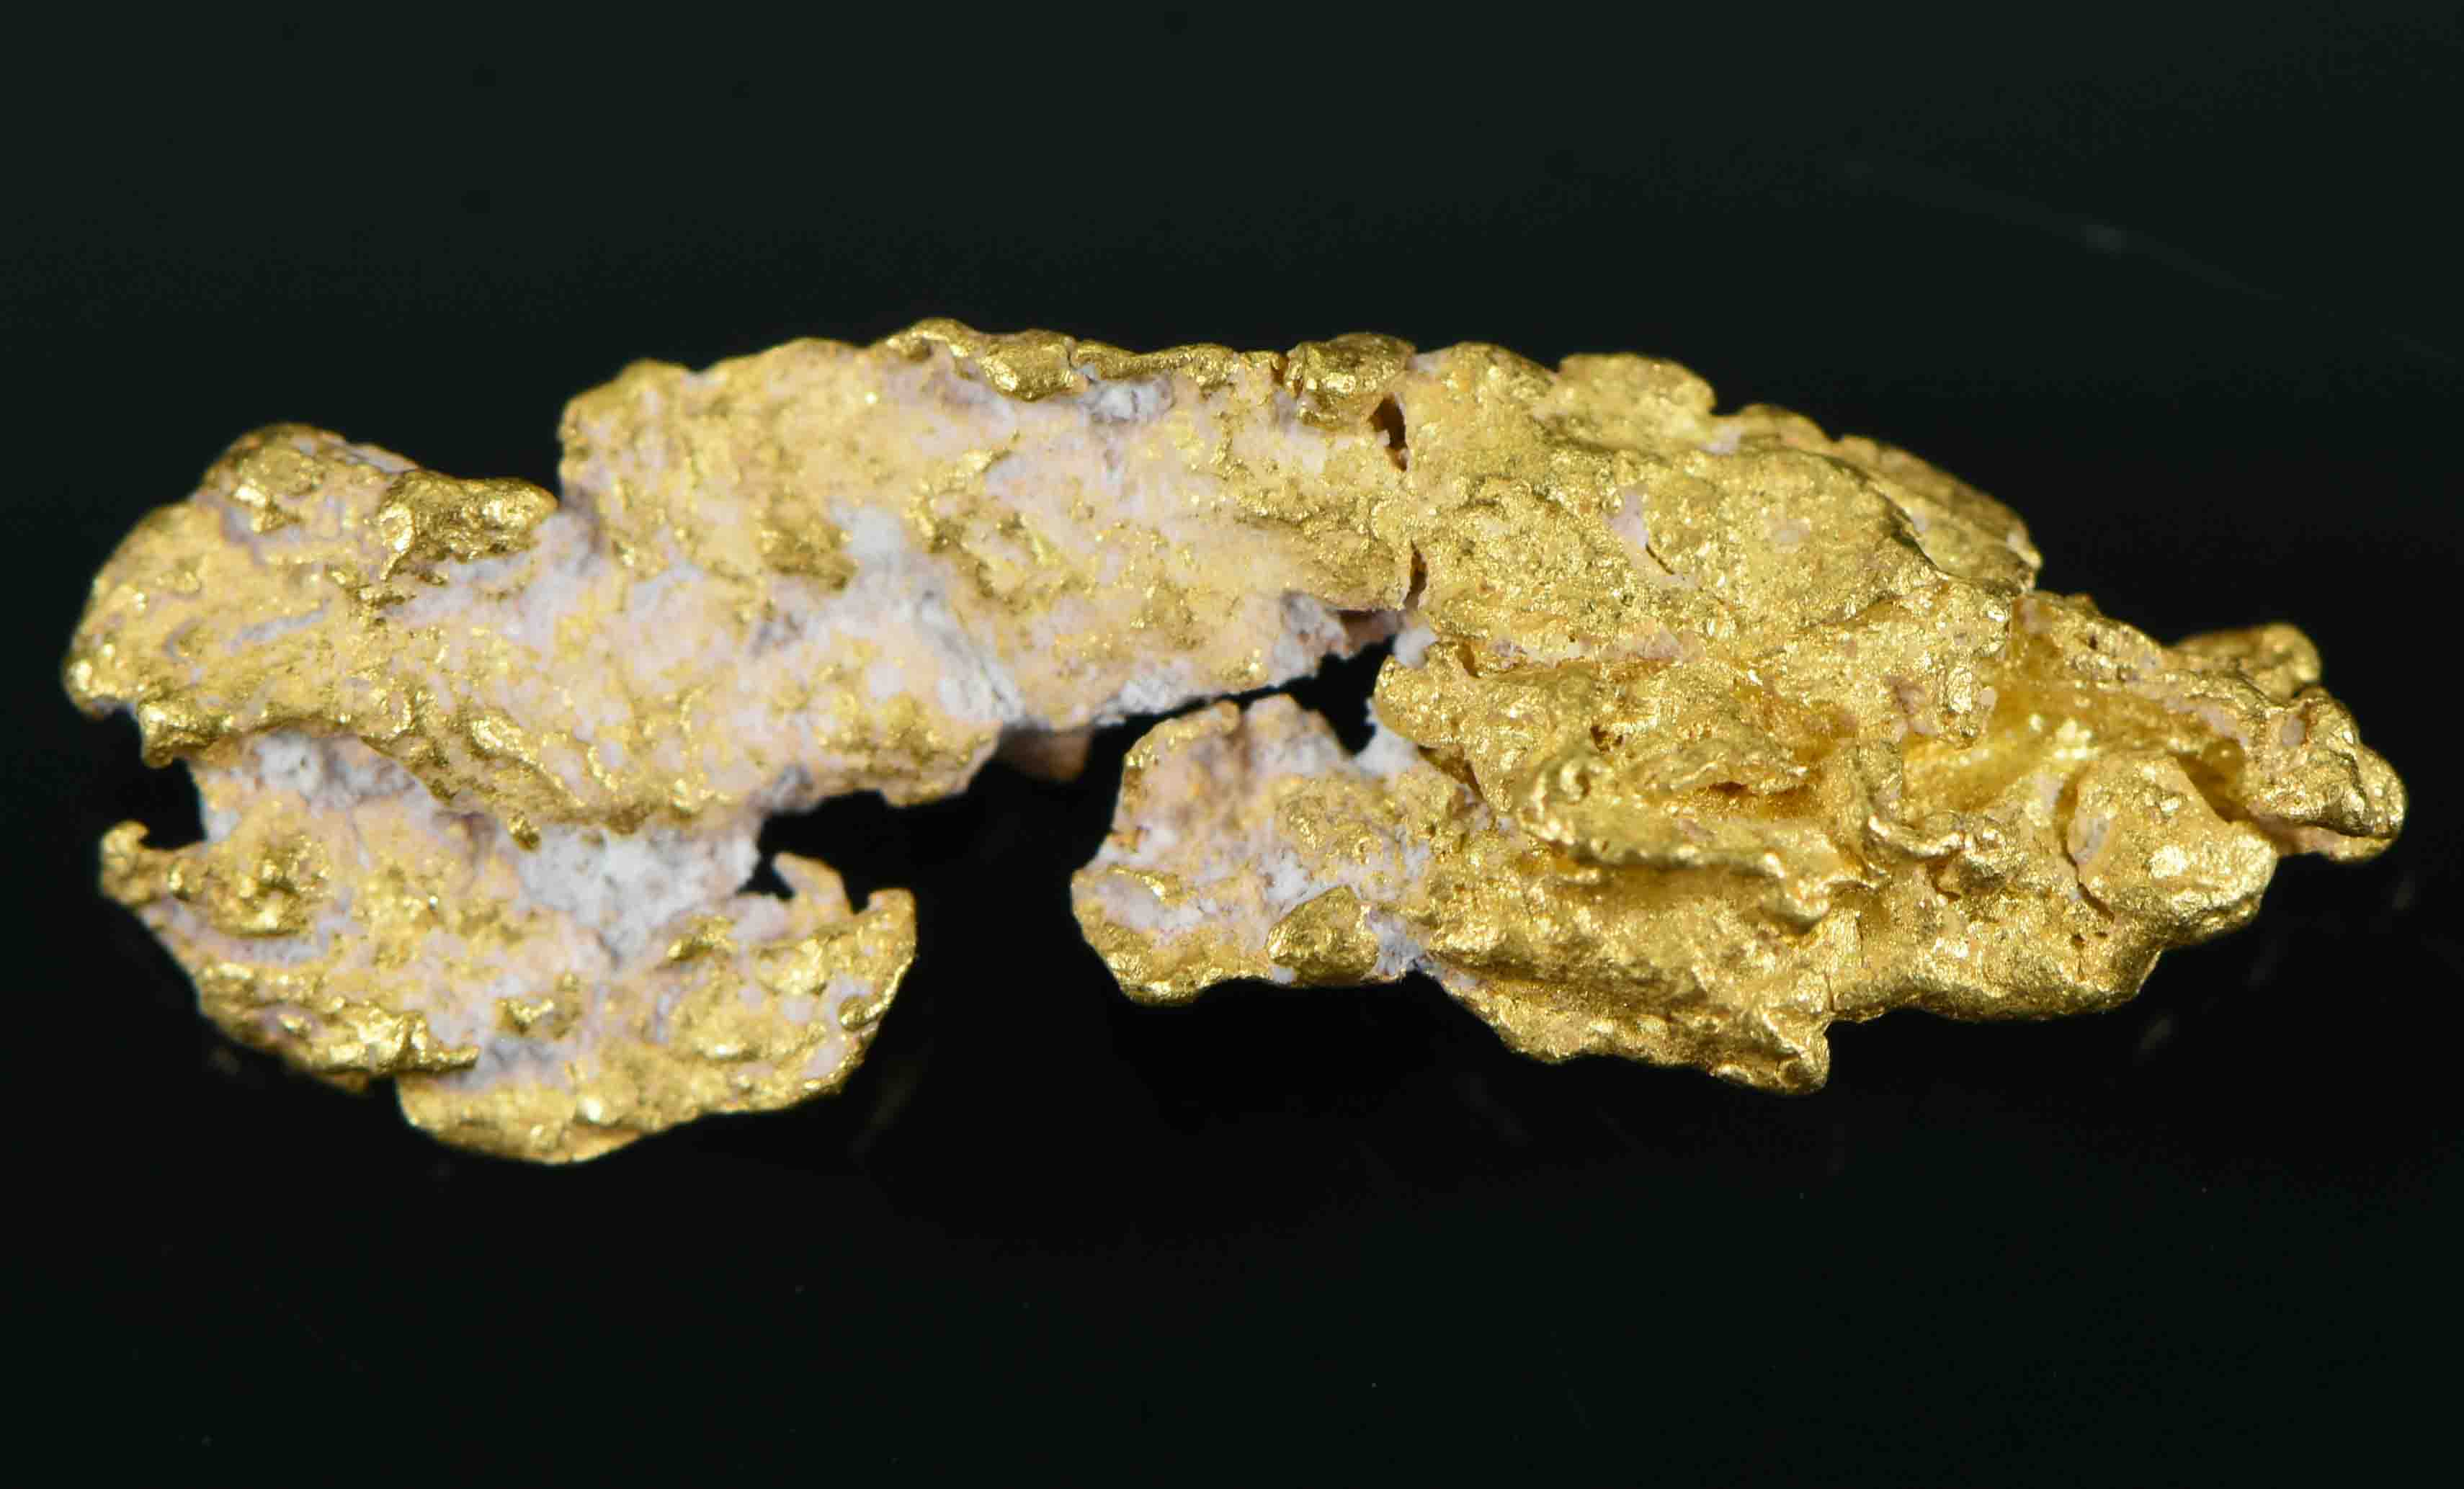 #11 Australian Natural Gold Nugget With Quartz Weighs 1.33 Grams.